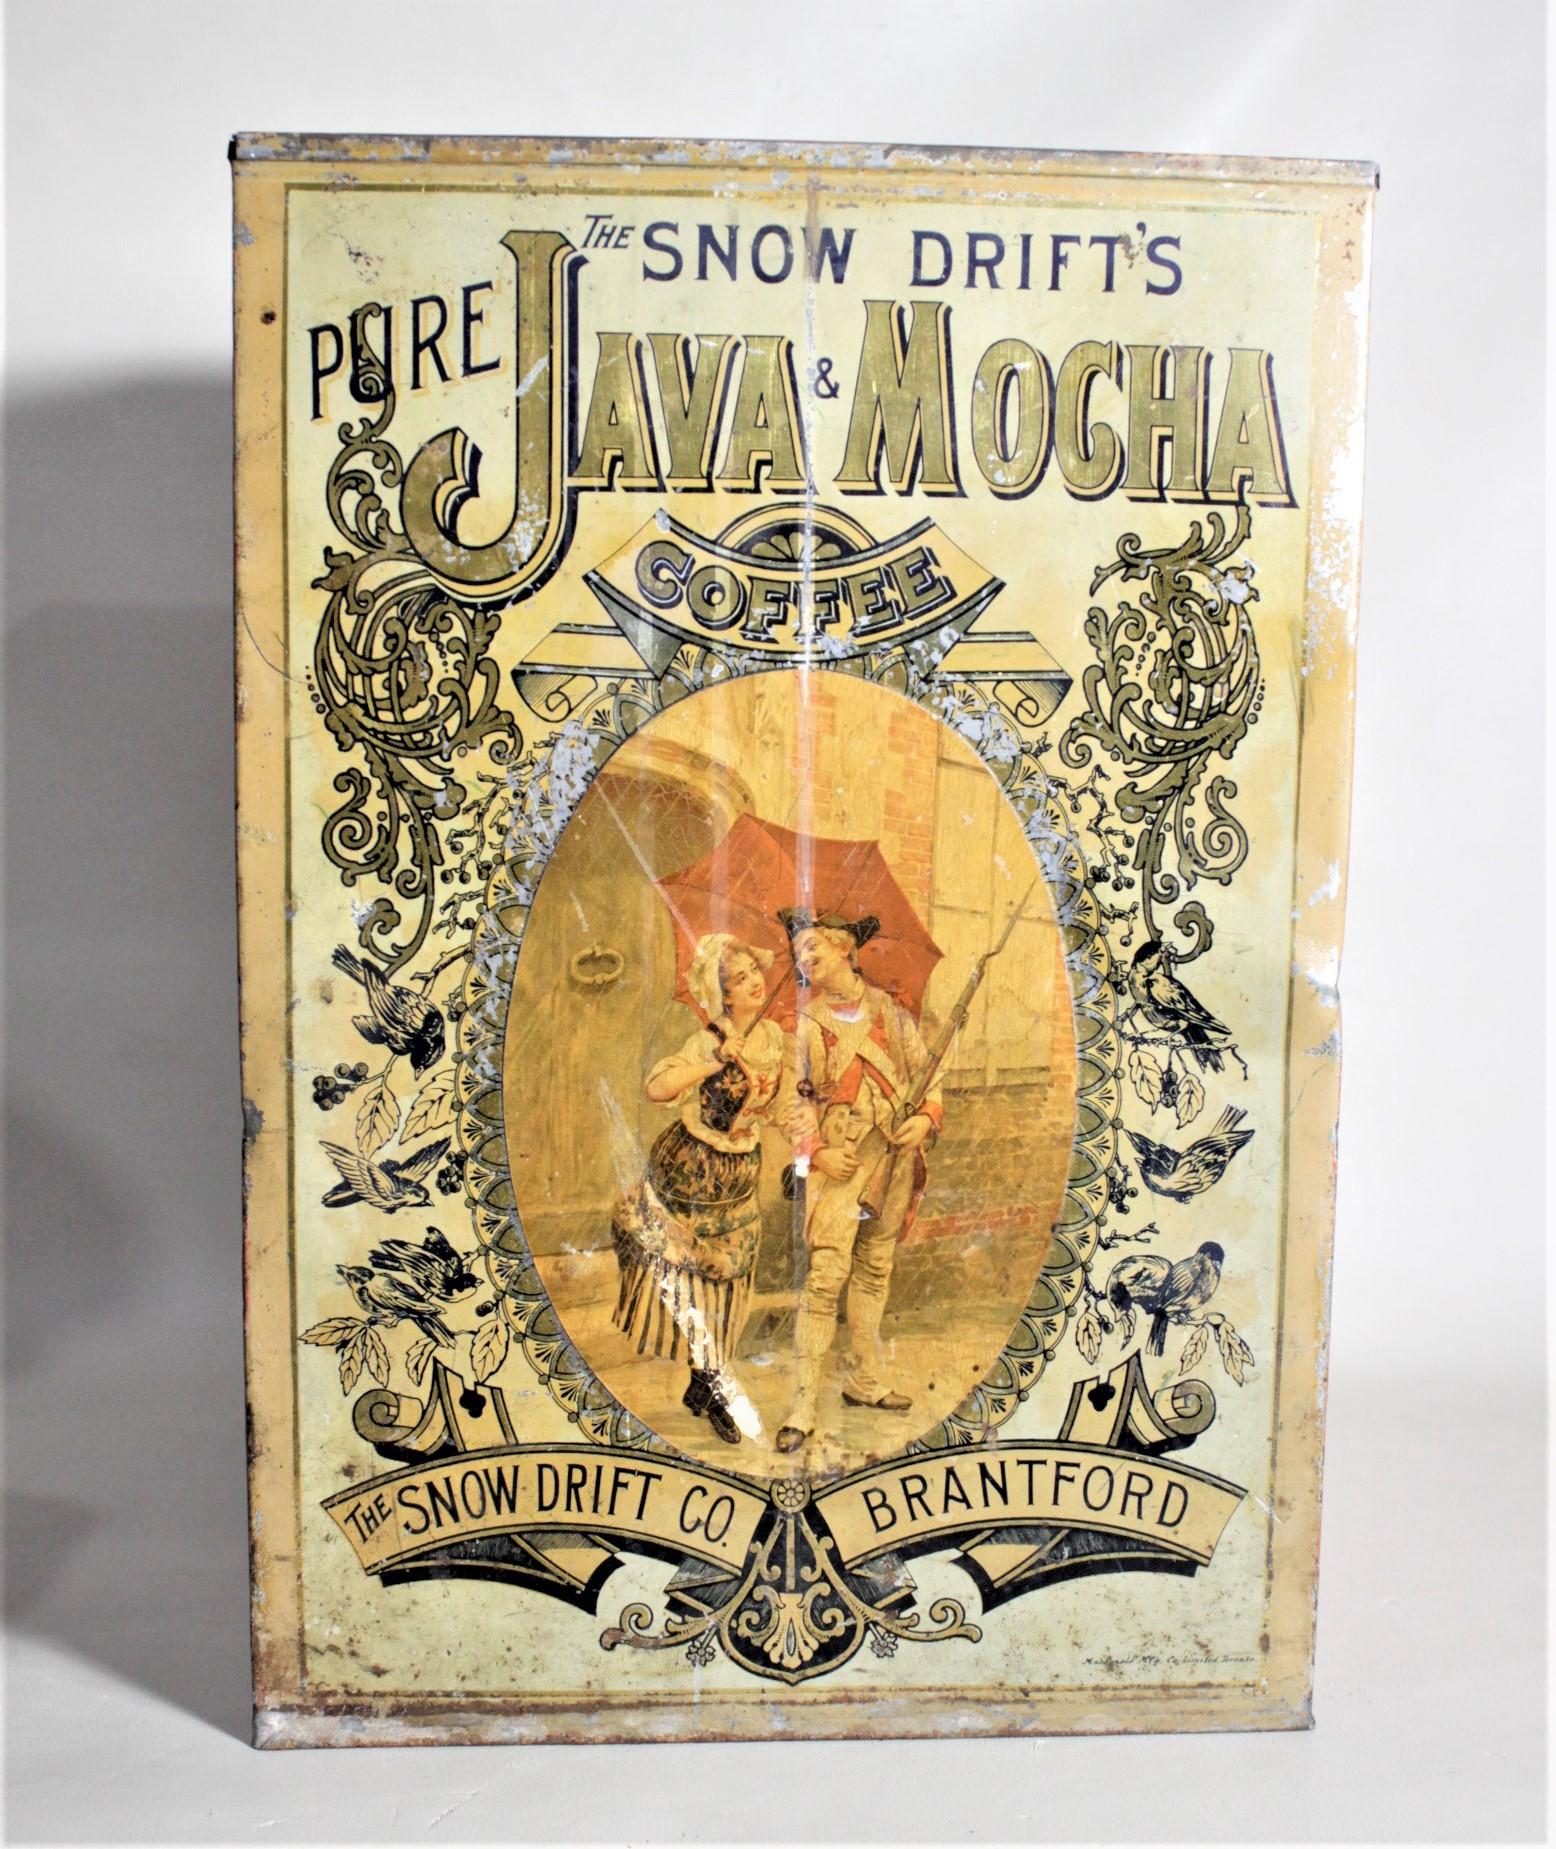 This antique general store advertising store display tin for Java Mocha coffee is presumed to have been made in Canada in approximately 1880 in the period Victorian style. The tin advertises 